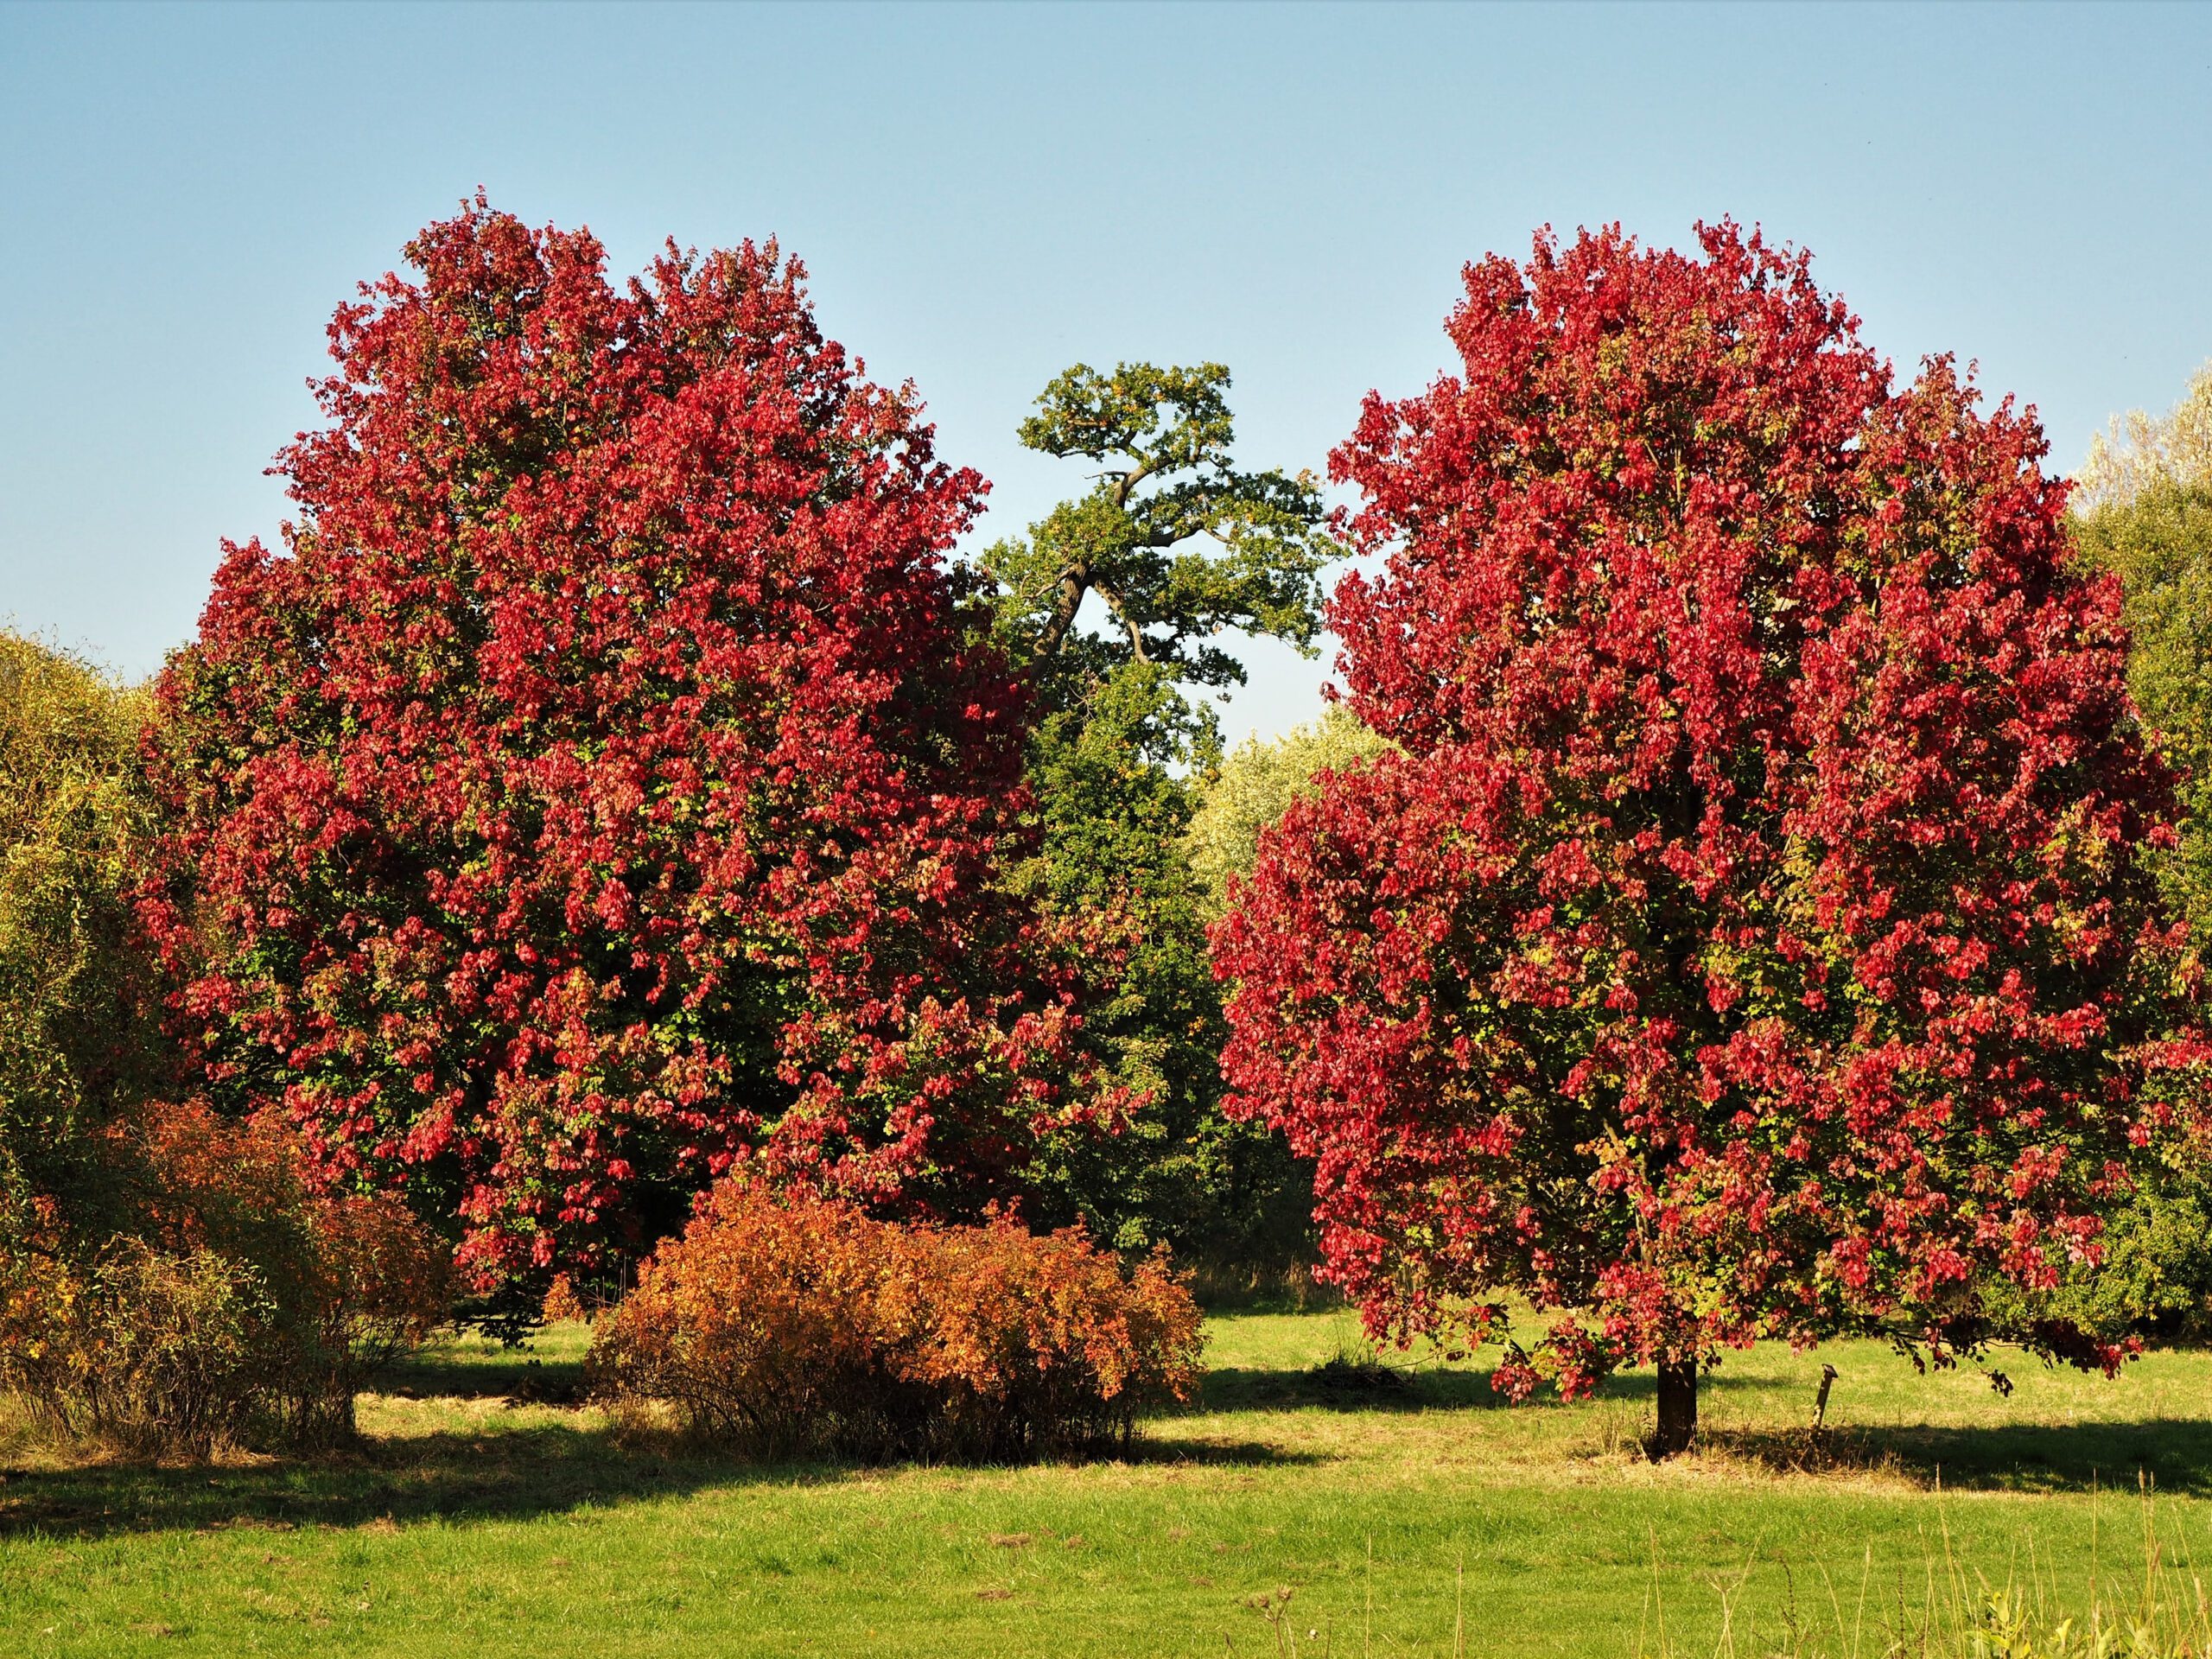 Acer rubrum October Glory trees in autumn colour in field